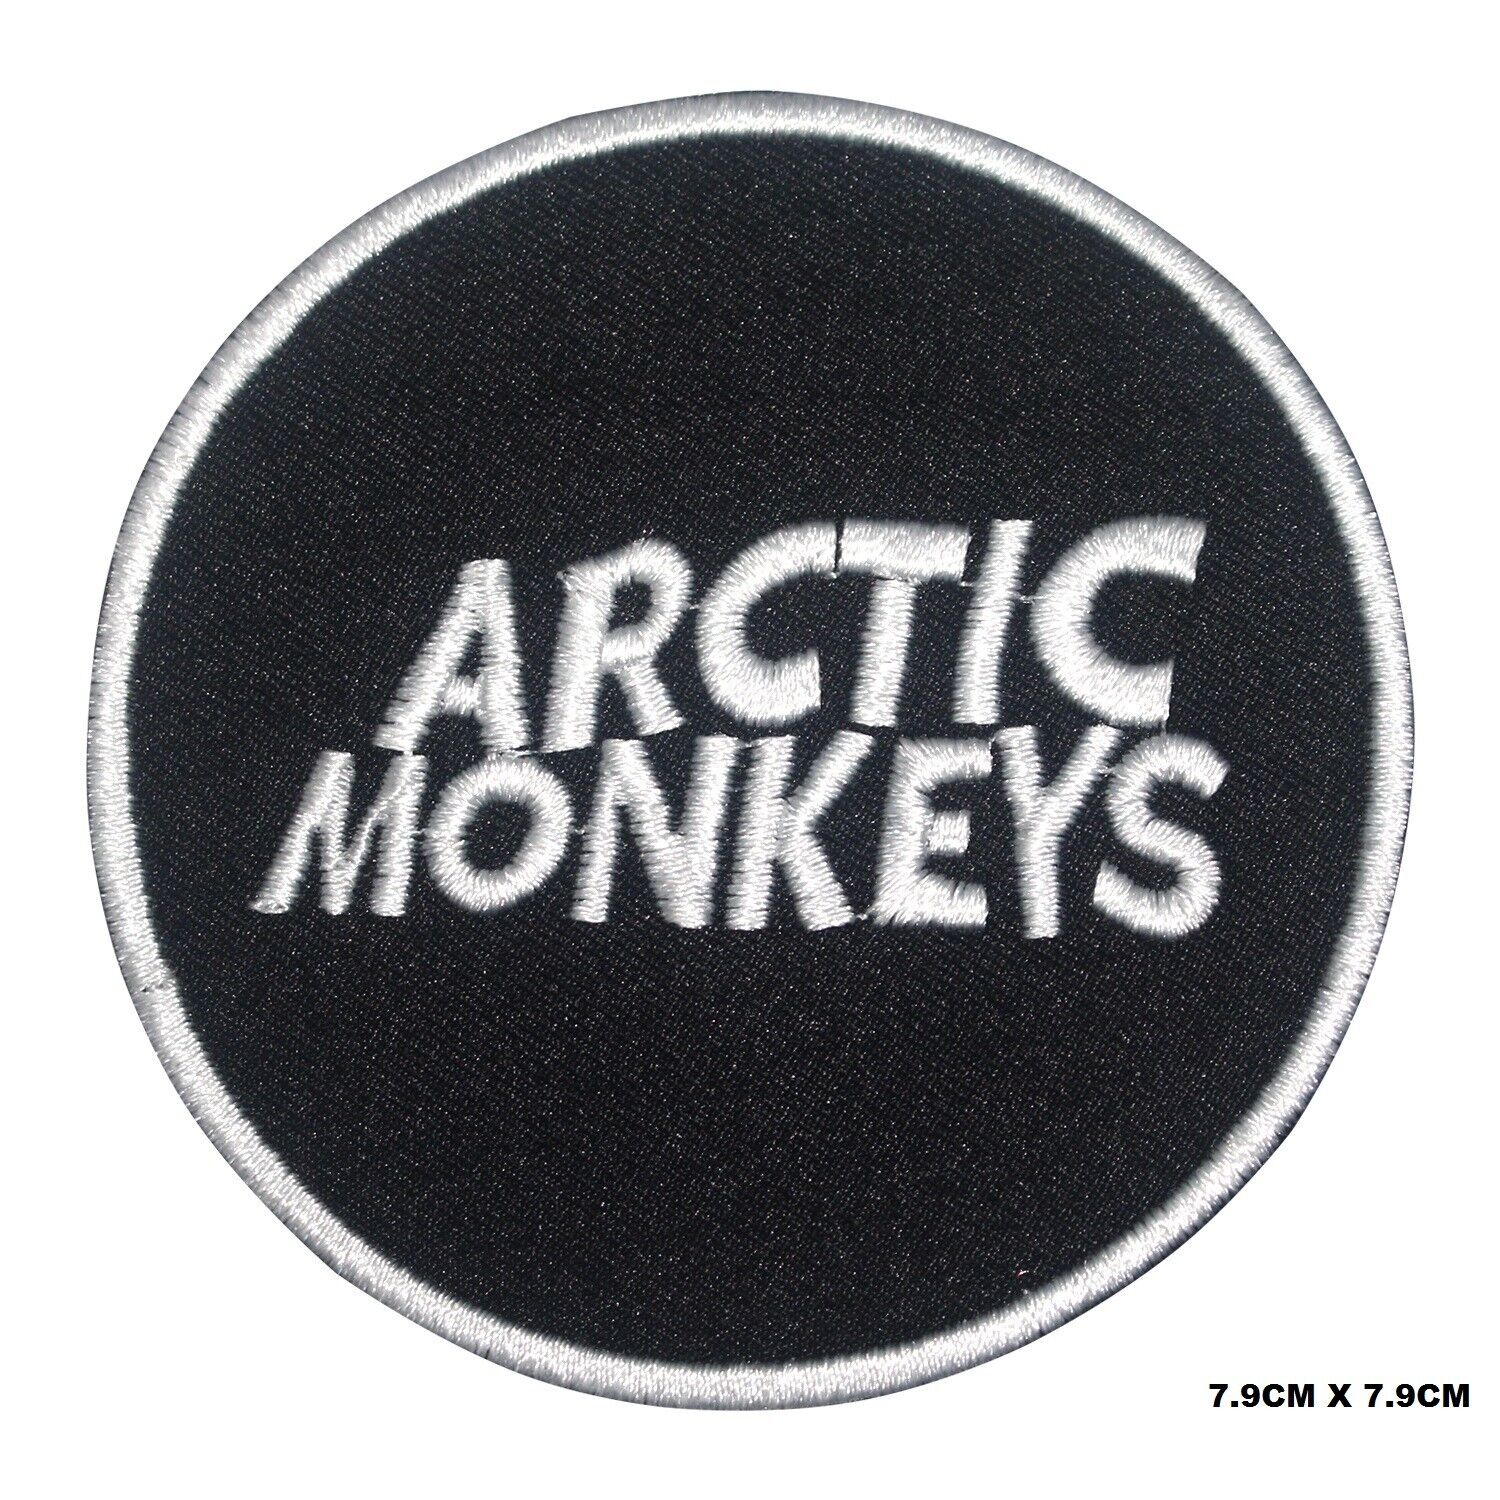 ARCTIC MONKEYS Circle Embroidered Patch Iron On/Sew On Patch Batch For Clothes